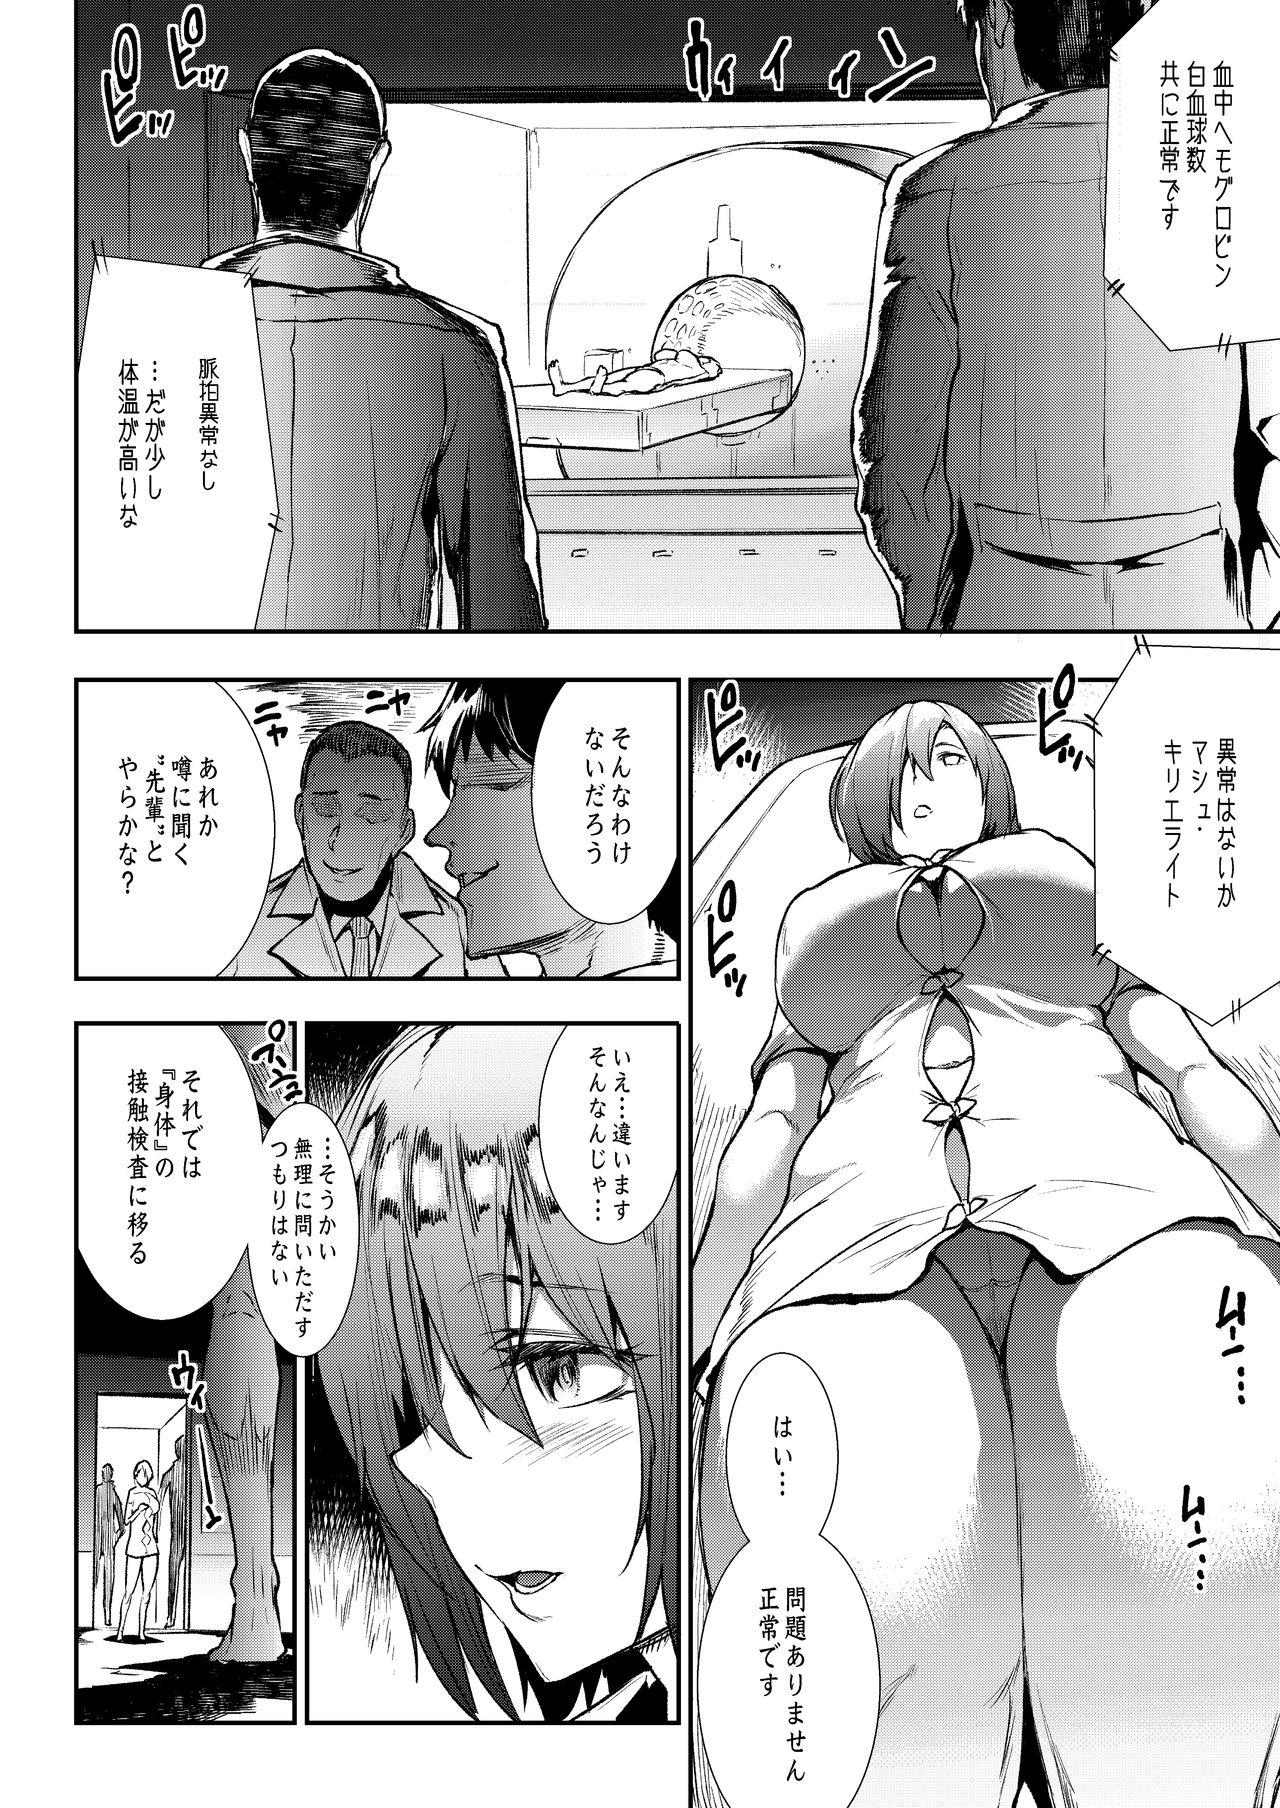 Thief Mash, Rinkan. - Fate grand order Foreplay - Page 6